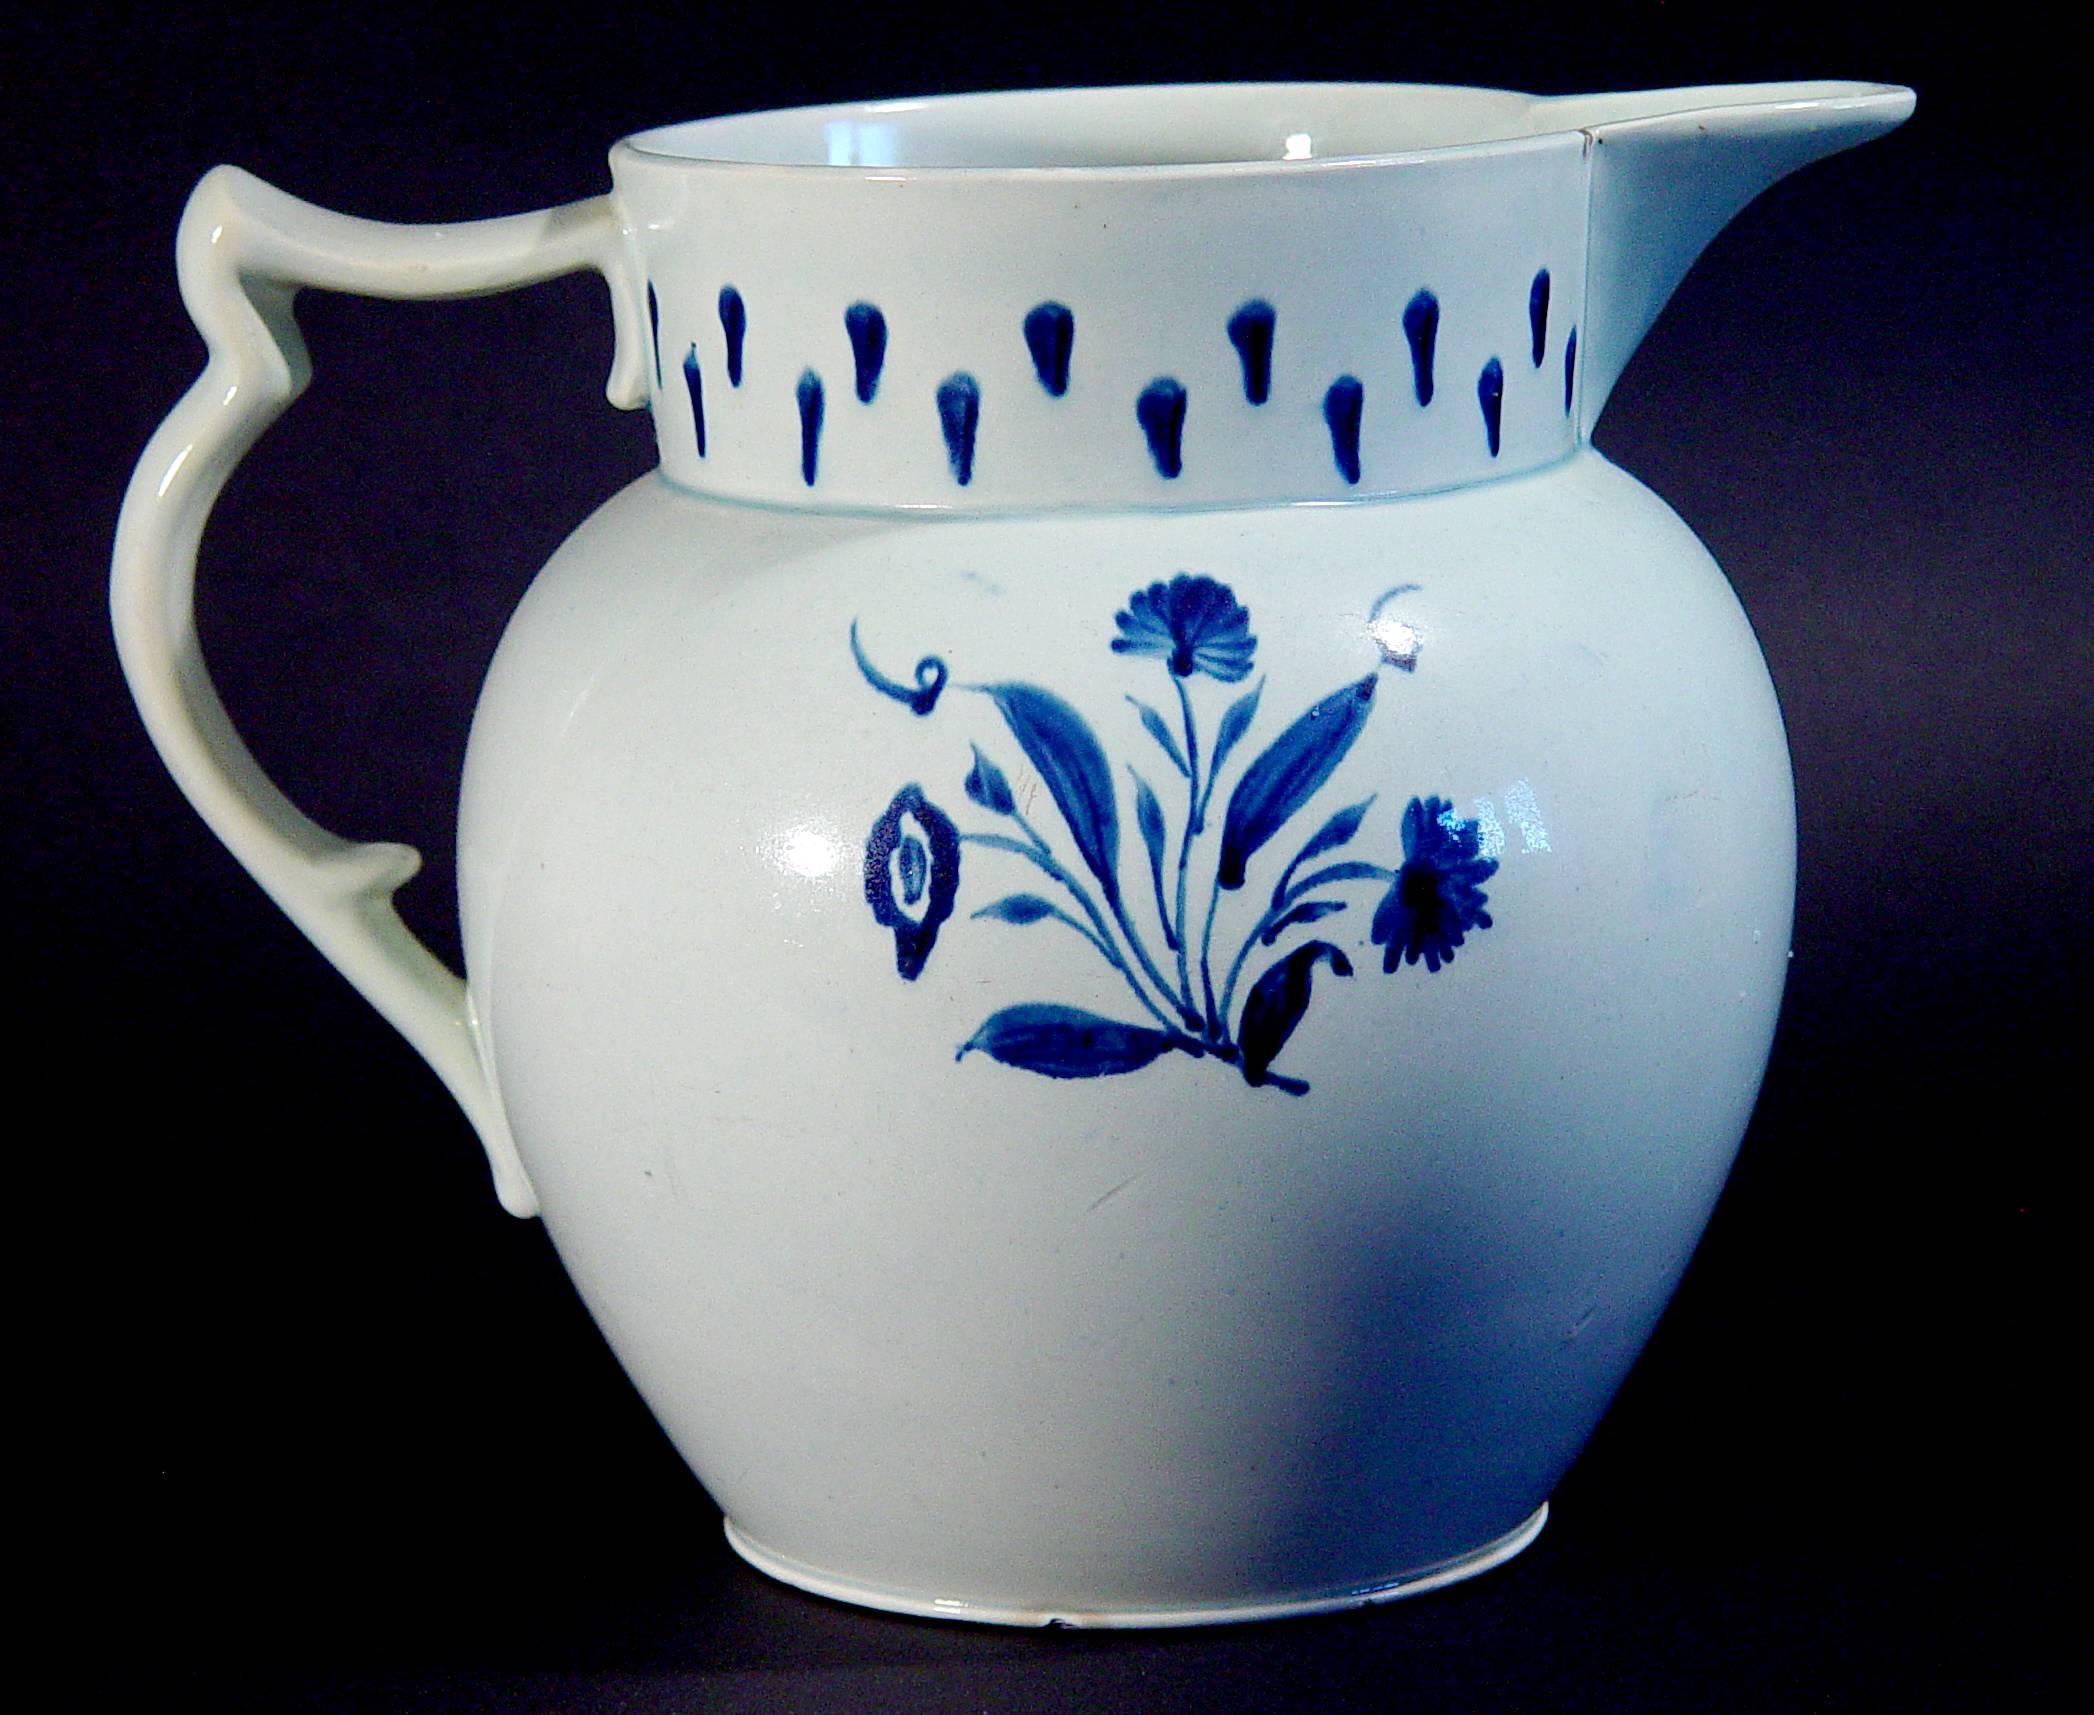 The large underglaze blue and white pearlware jug is decorated with flowers on one side and a simple modernistic stylized drape design on the other.